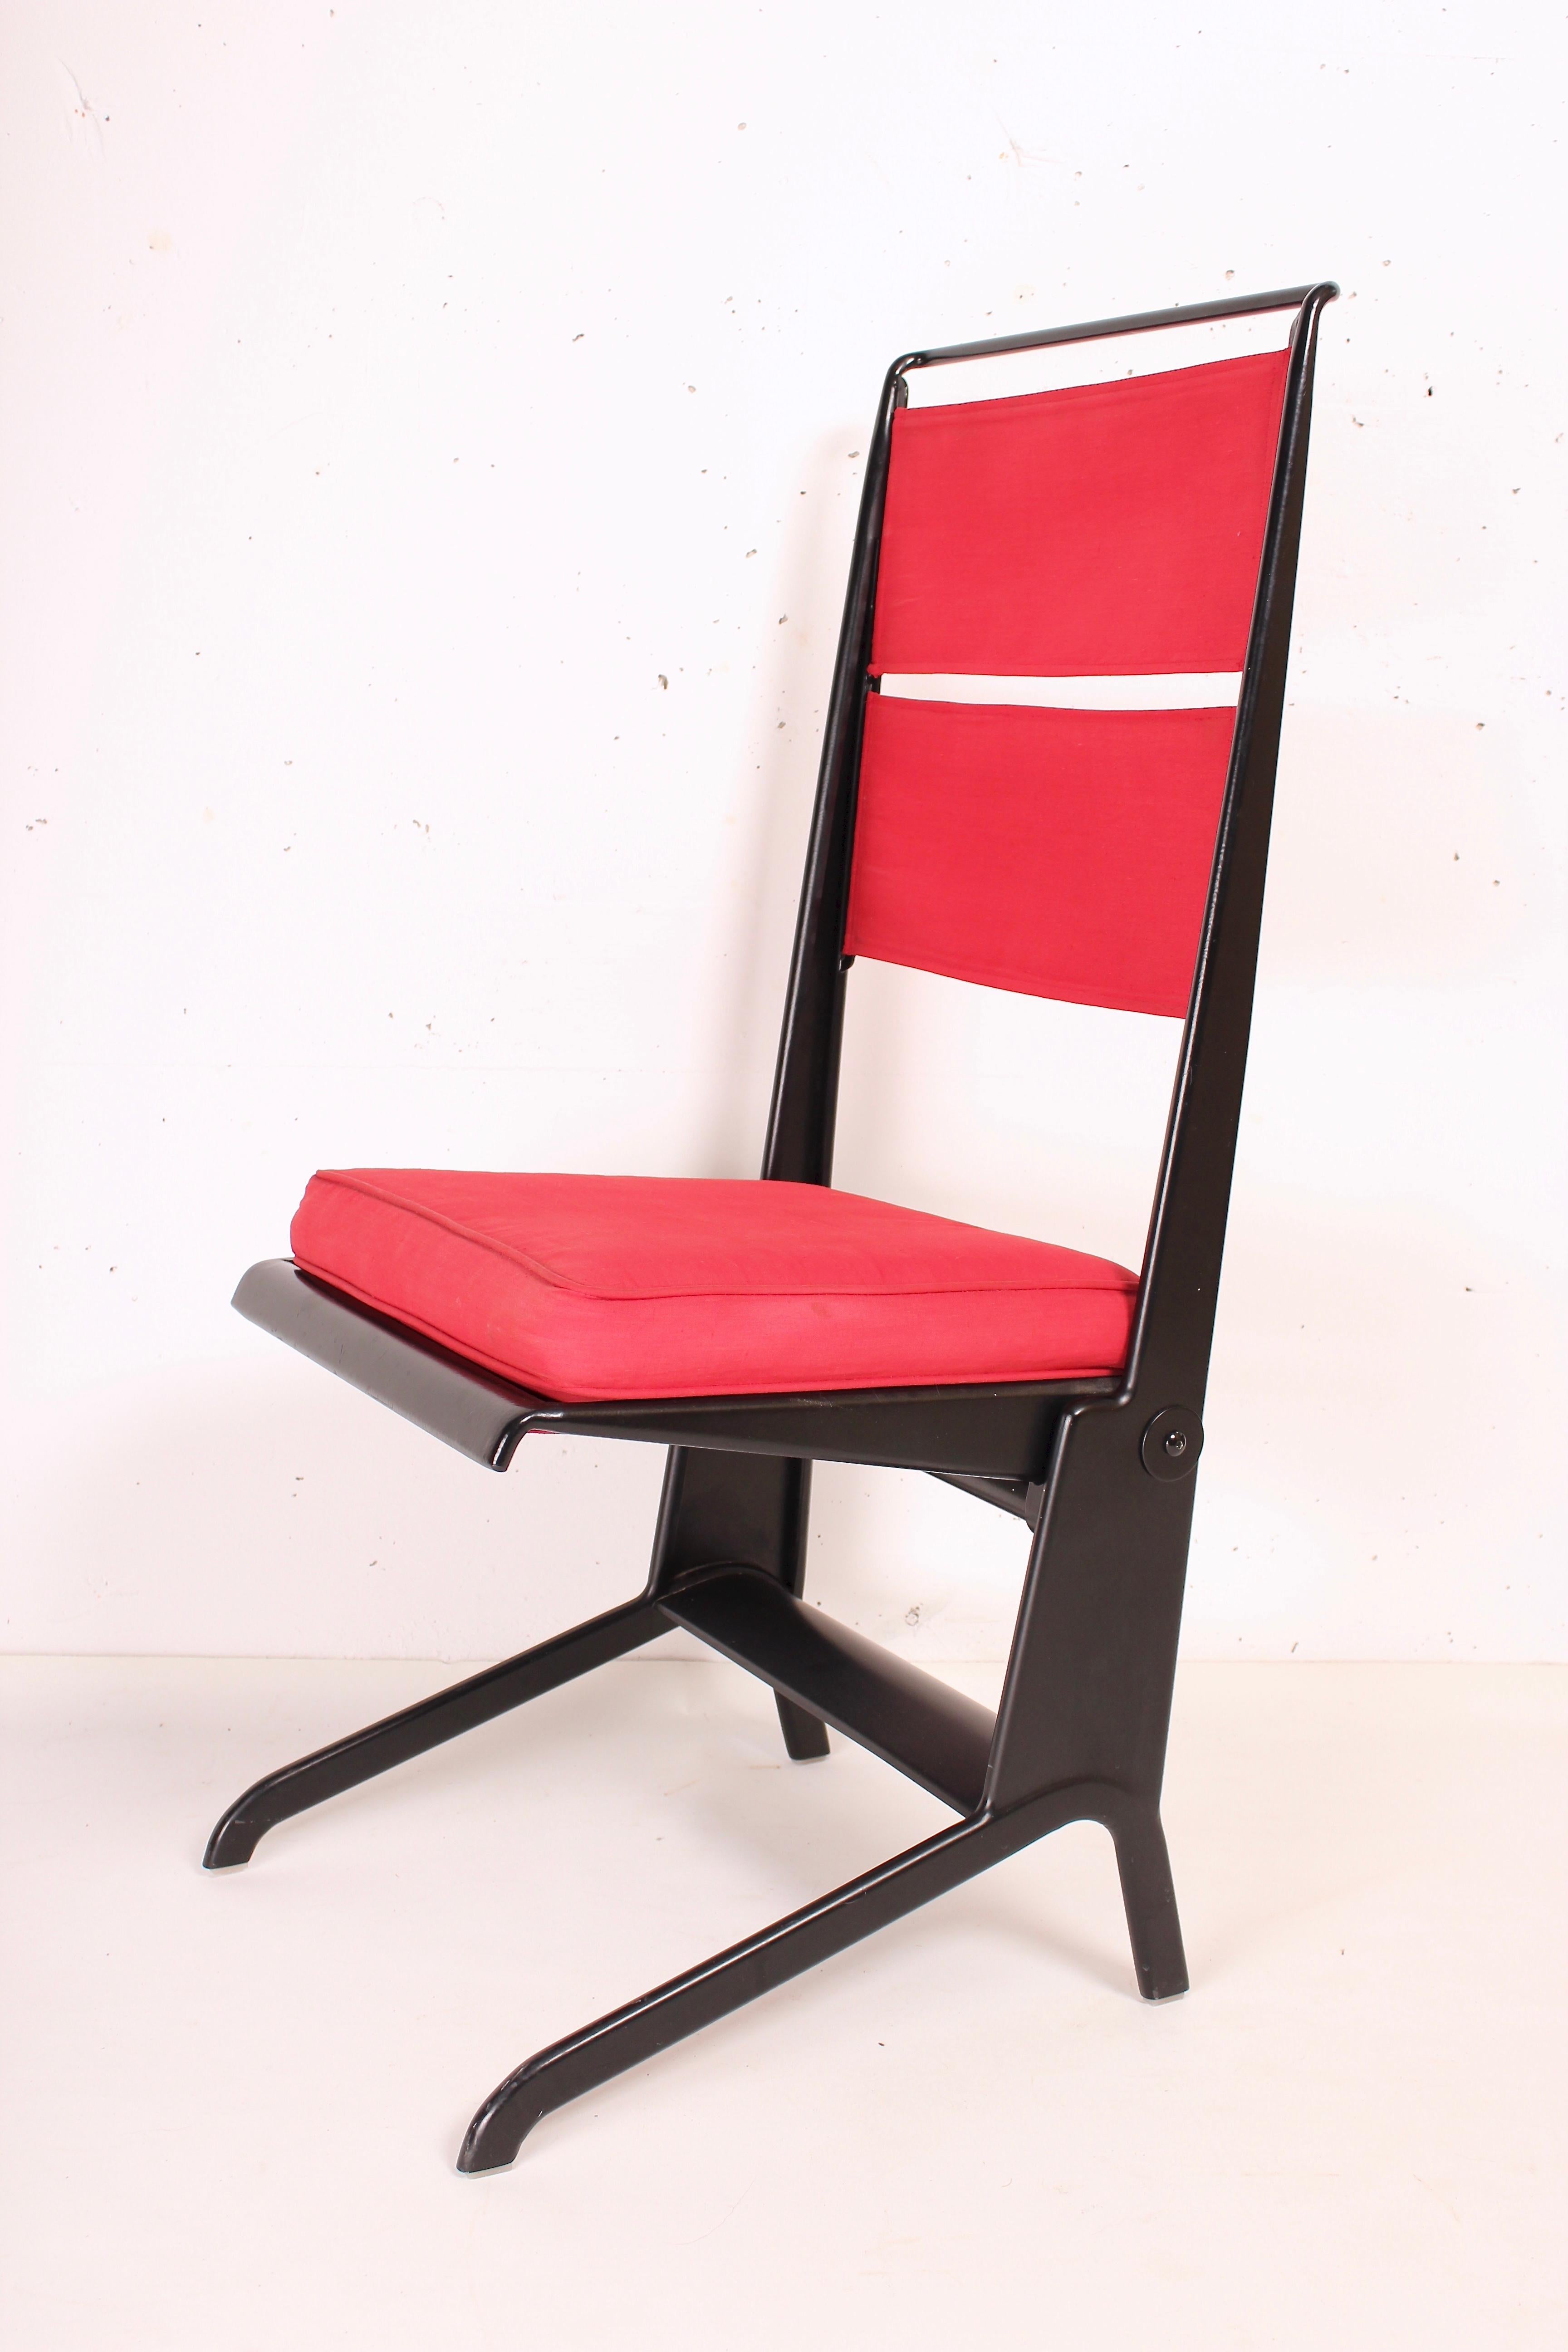 Late 20th Century Jean Prouvé Folding Chair Designed 1930, Manufactured by Tecta, 1983 For Sale